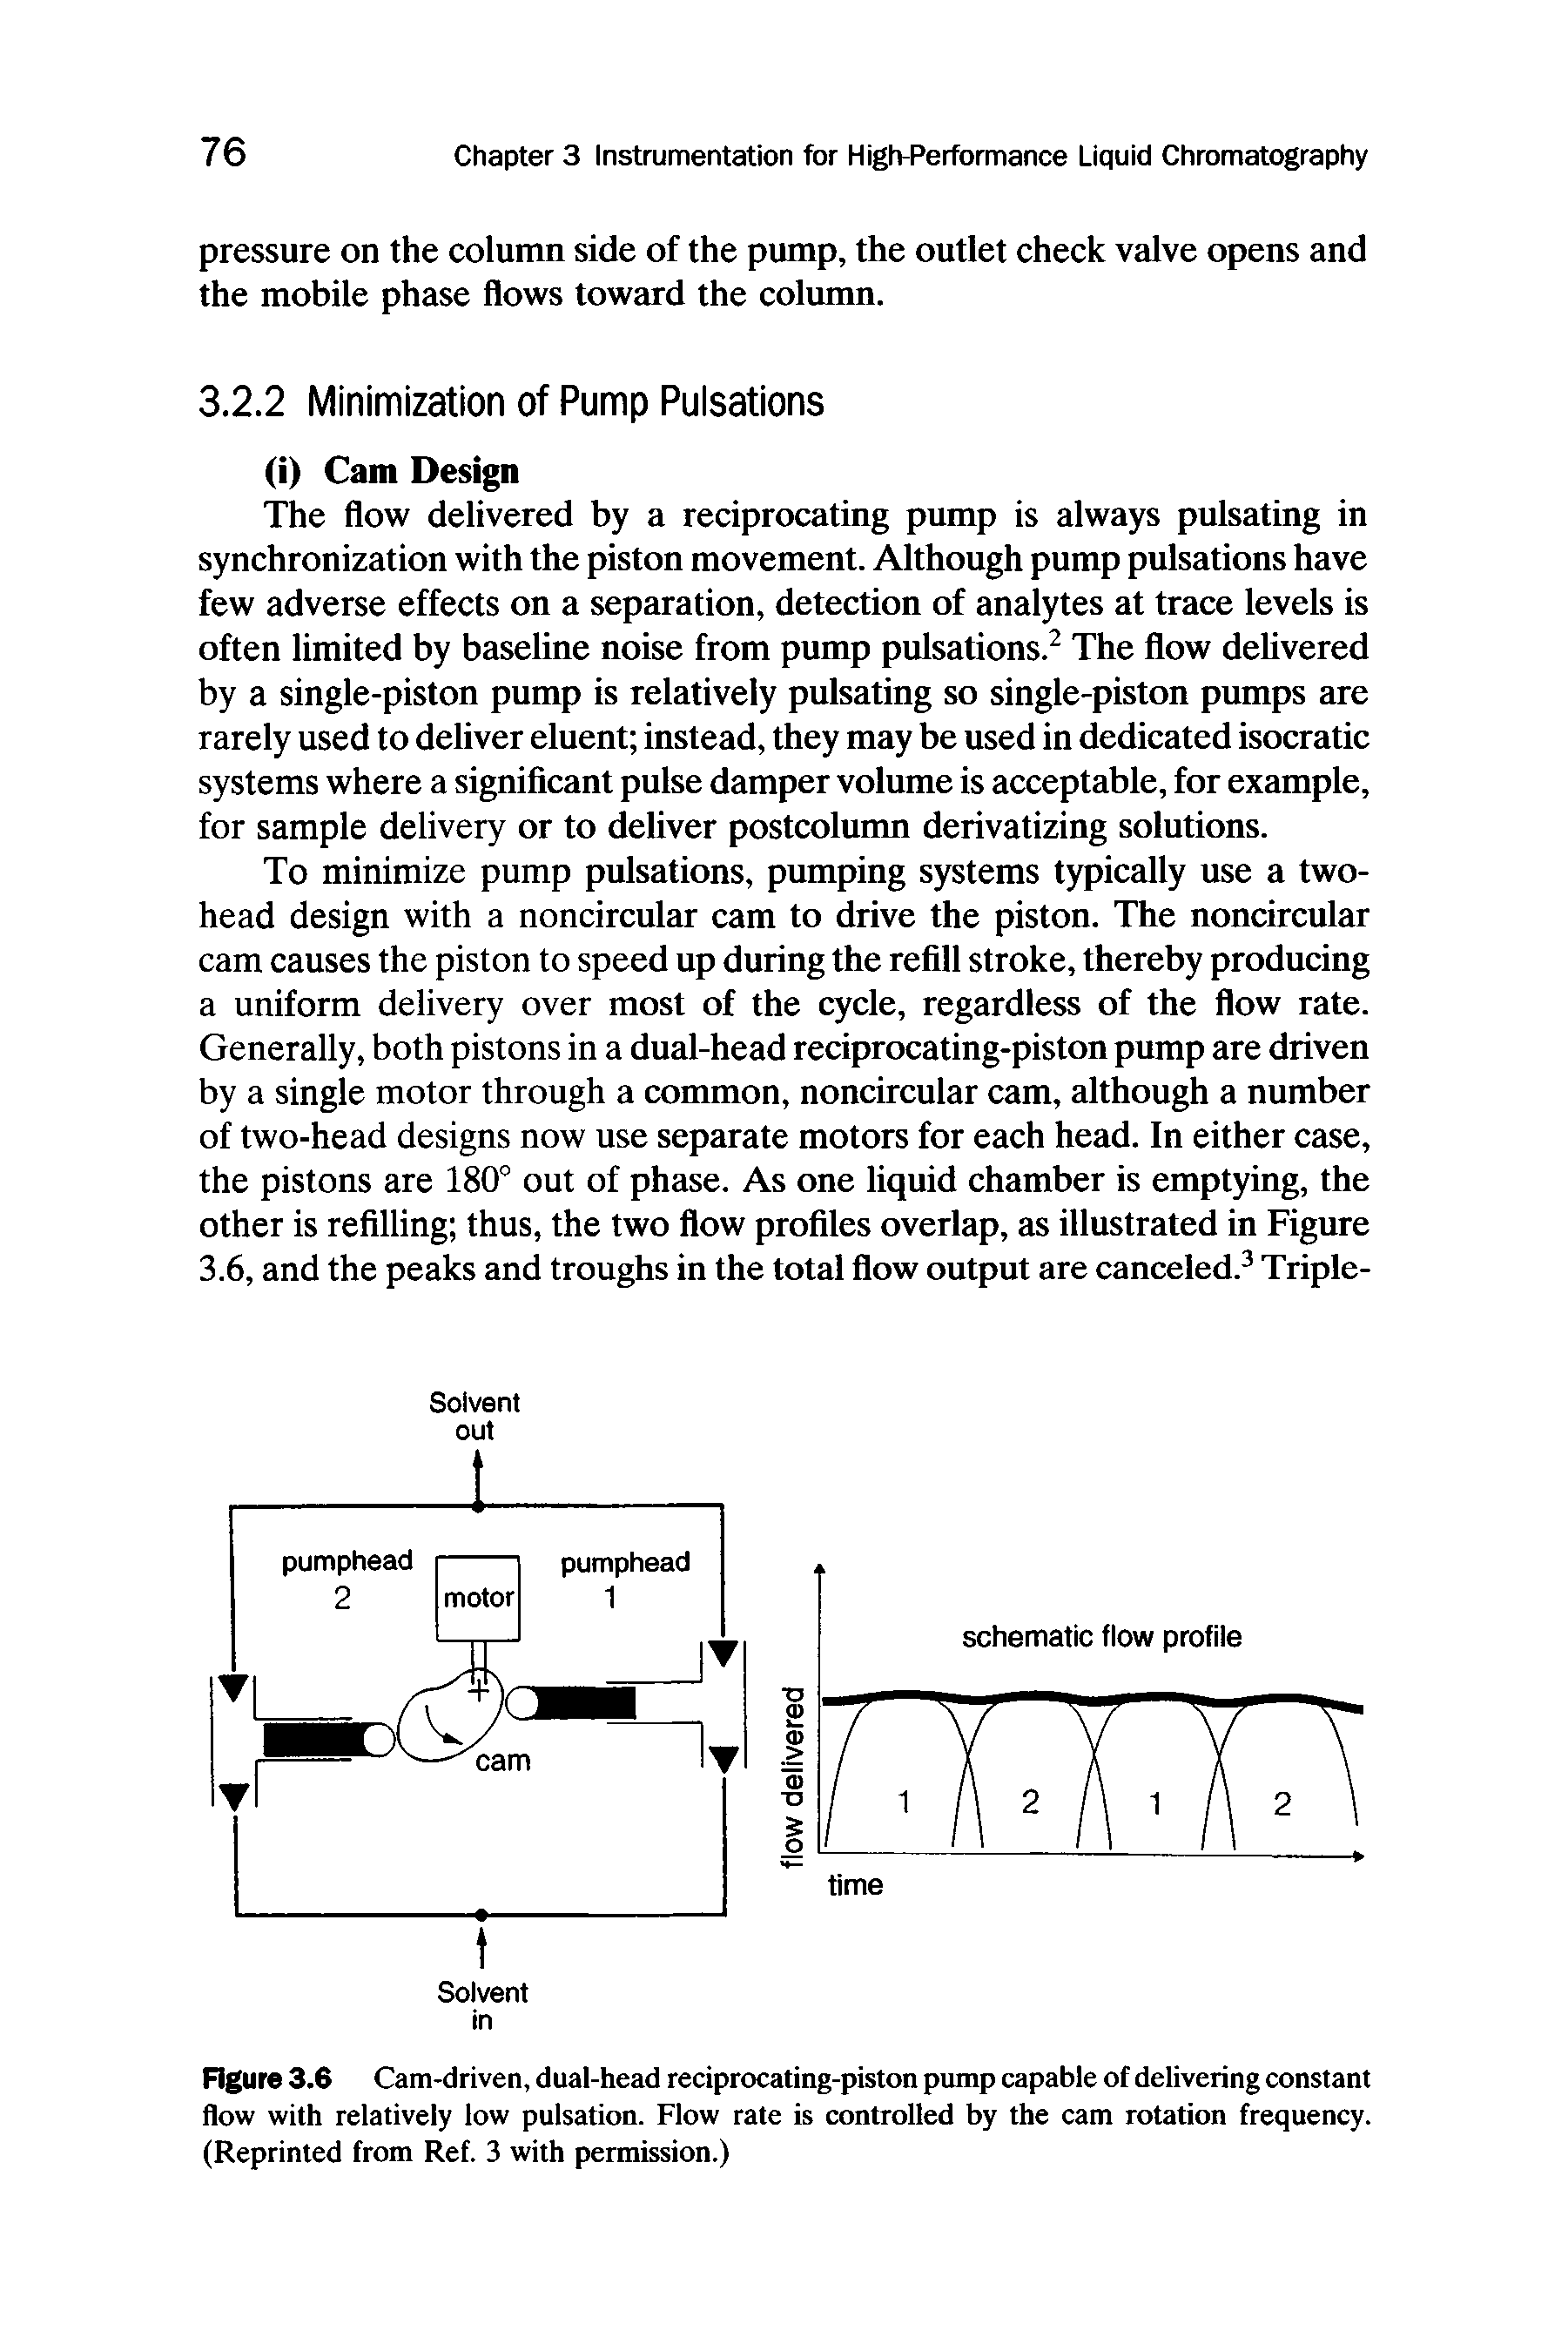 Figure 3.6 Cam-driven, dual-head reciprocating-piston pump capable of delivering constant flow with relatively low pulsation. Flow rate is controlled by the cam rotation frequency. (Reprinted from Ref. 3 with permission.)...